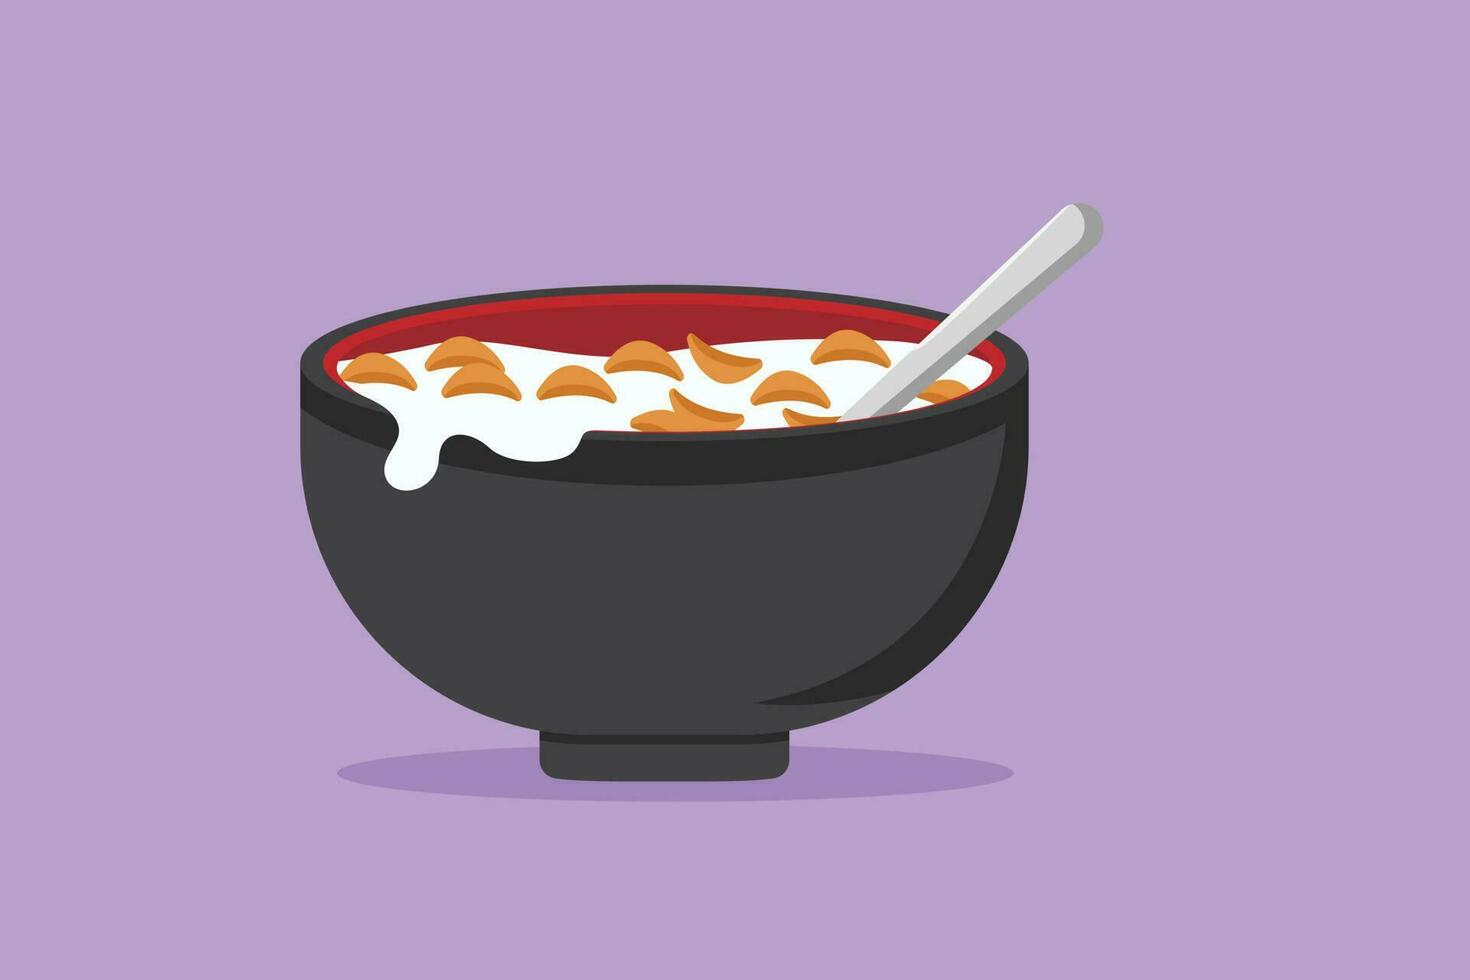 Cartoon flat style drawing stylized bowl of cereal breakfast with fresh milk. Healthy whole wheat food concept. Health food nutrition. For flyer, icon, logo, symbol. Graphic design vector illustration